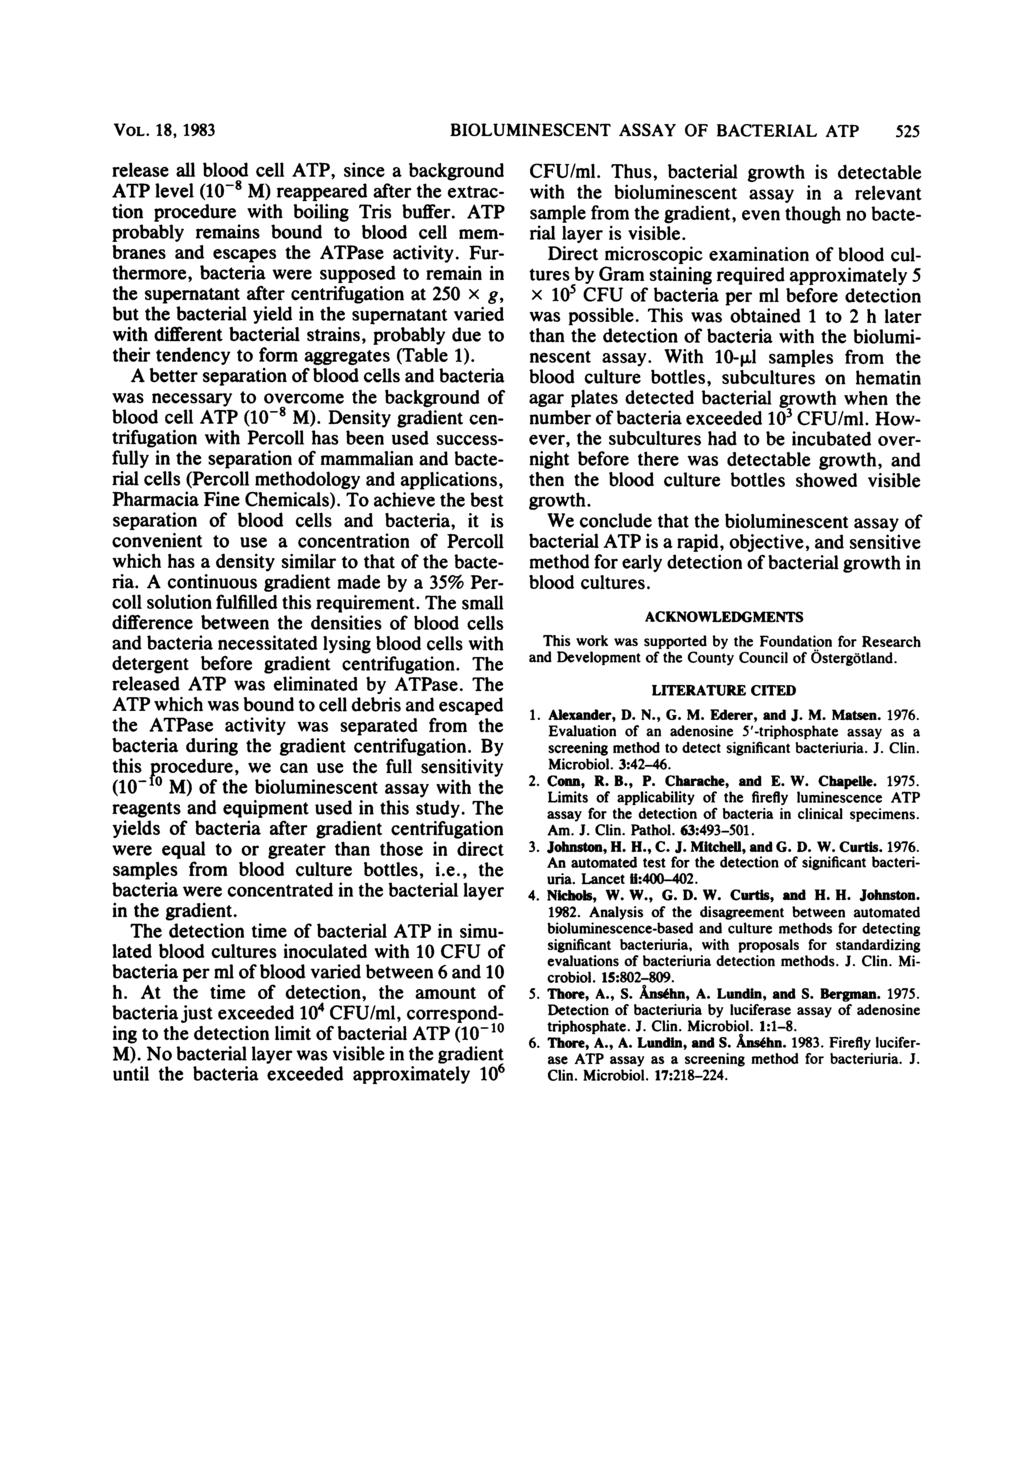 VOL. 18, 1983 release all blood cell ATP, since a background ATP level (10-8 M) reappeared after the extraction procedure with boiling Tris buffer.